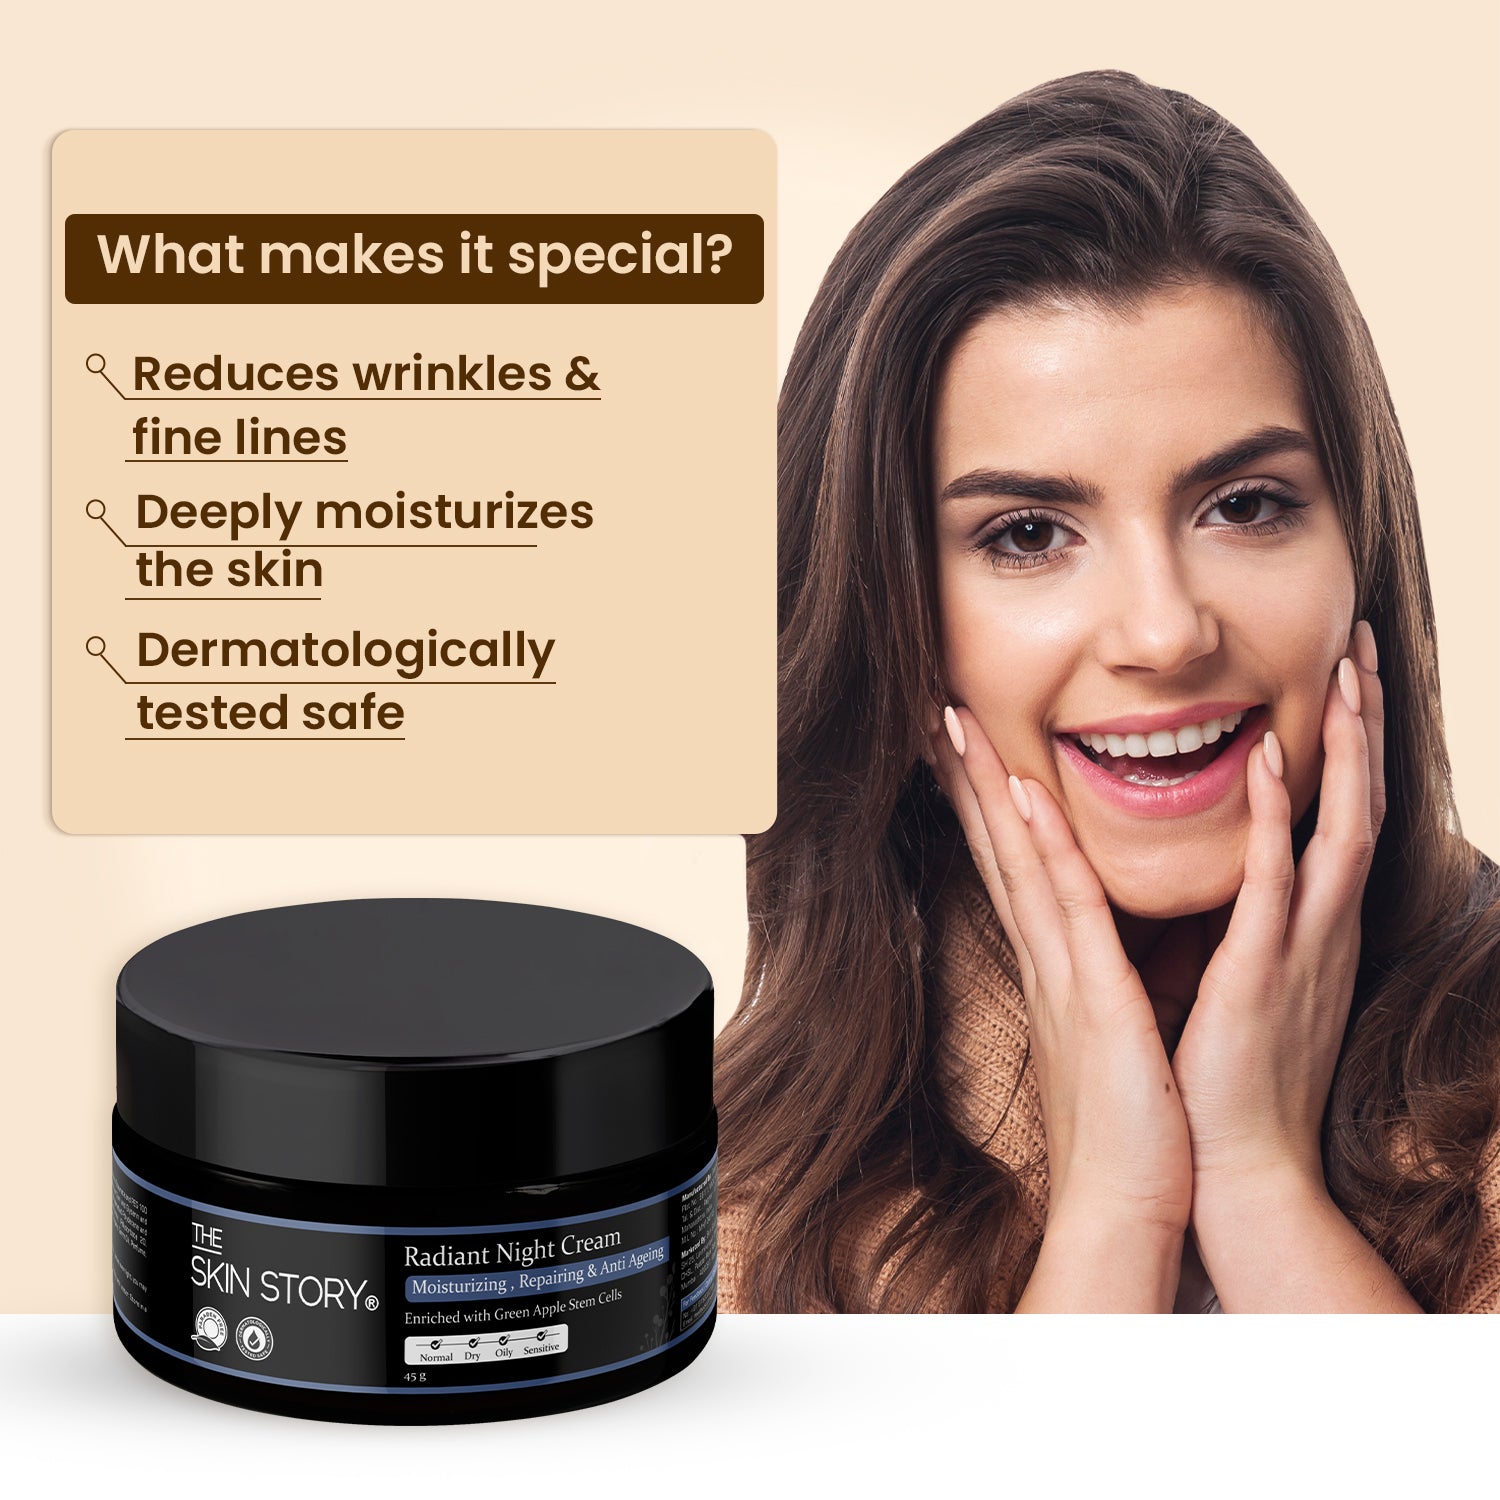 The Skin Story Anti Ageing Radiant Night Cream for Women | Night Cream for Glowing & Radiant Skin |Fights Fine Lines & Wrinkles | For Women |With Stem Cells  45g